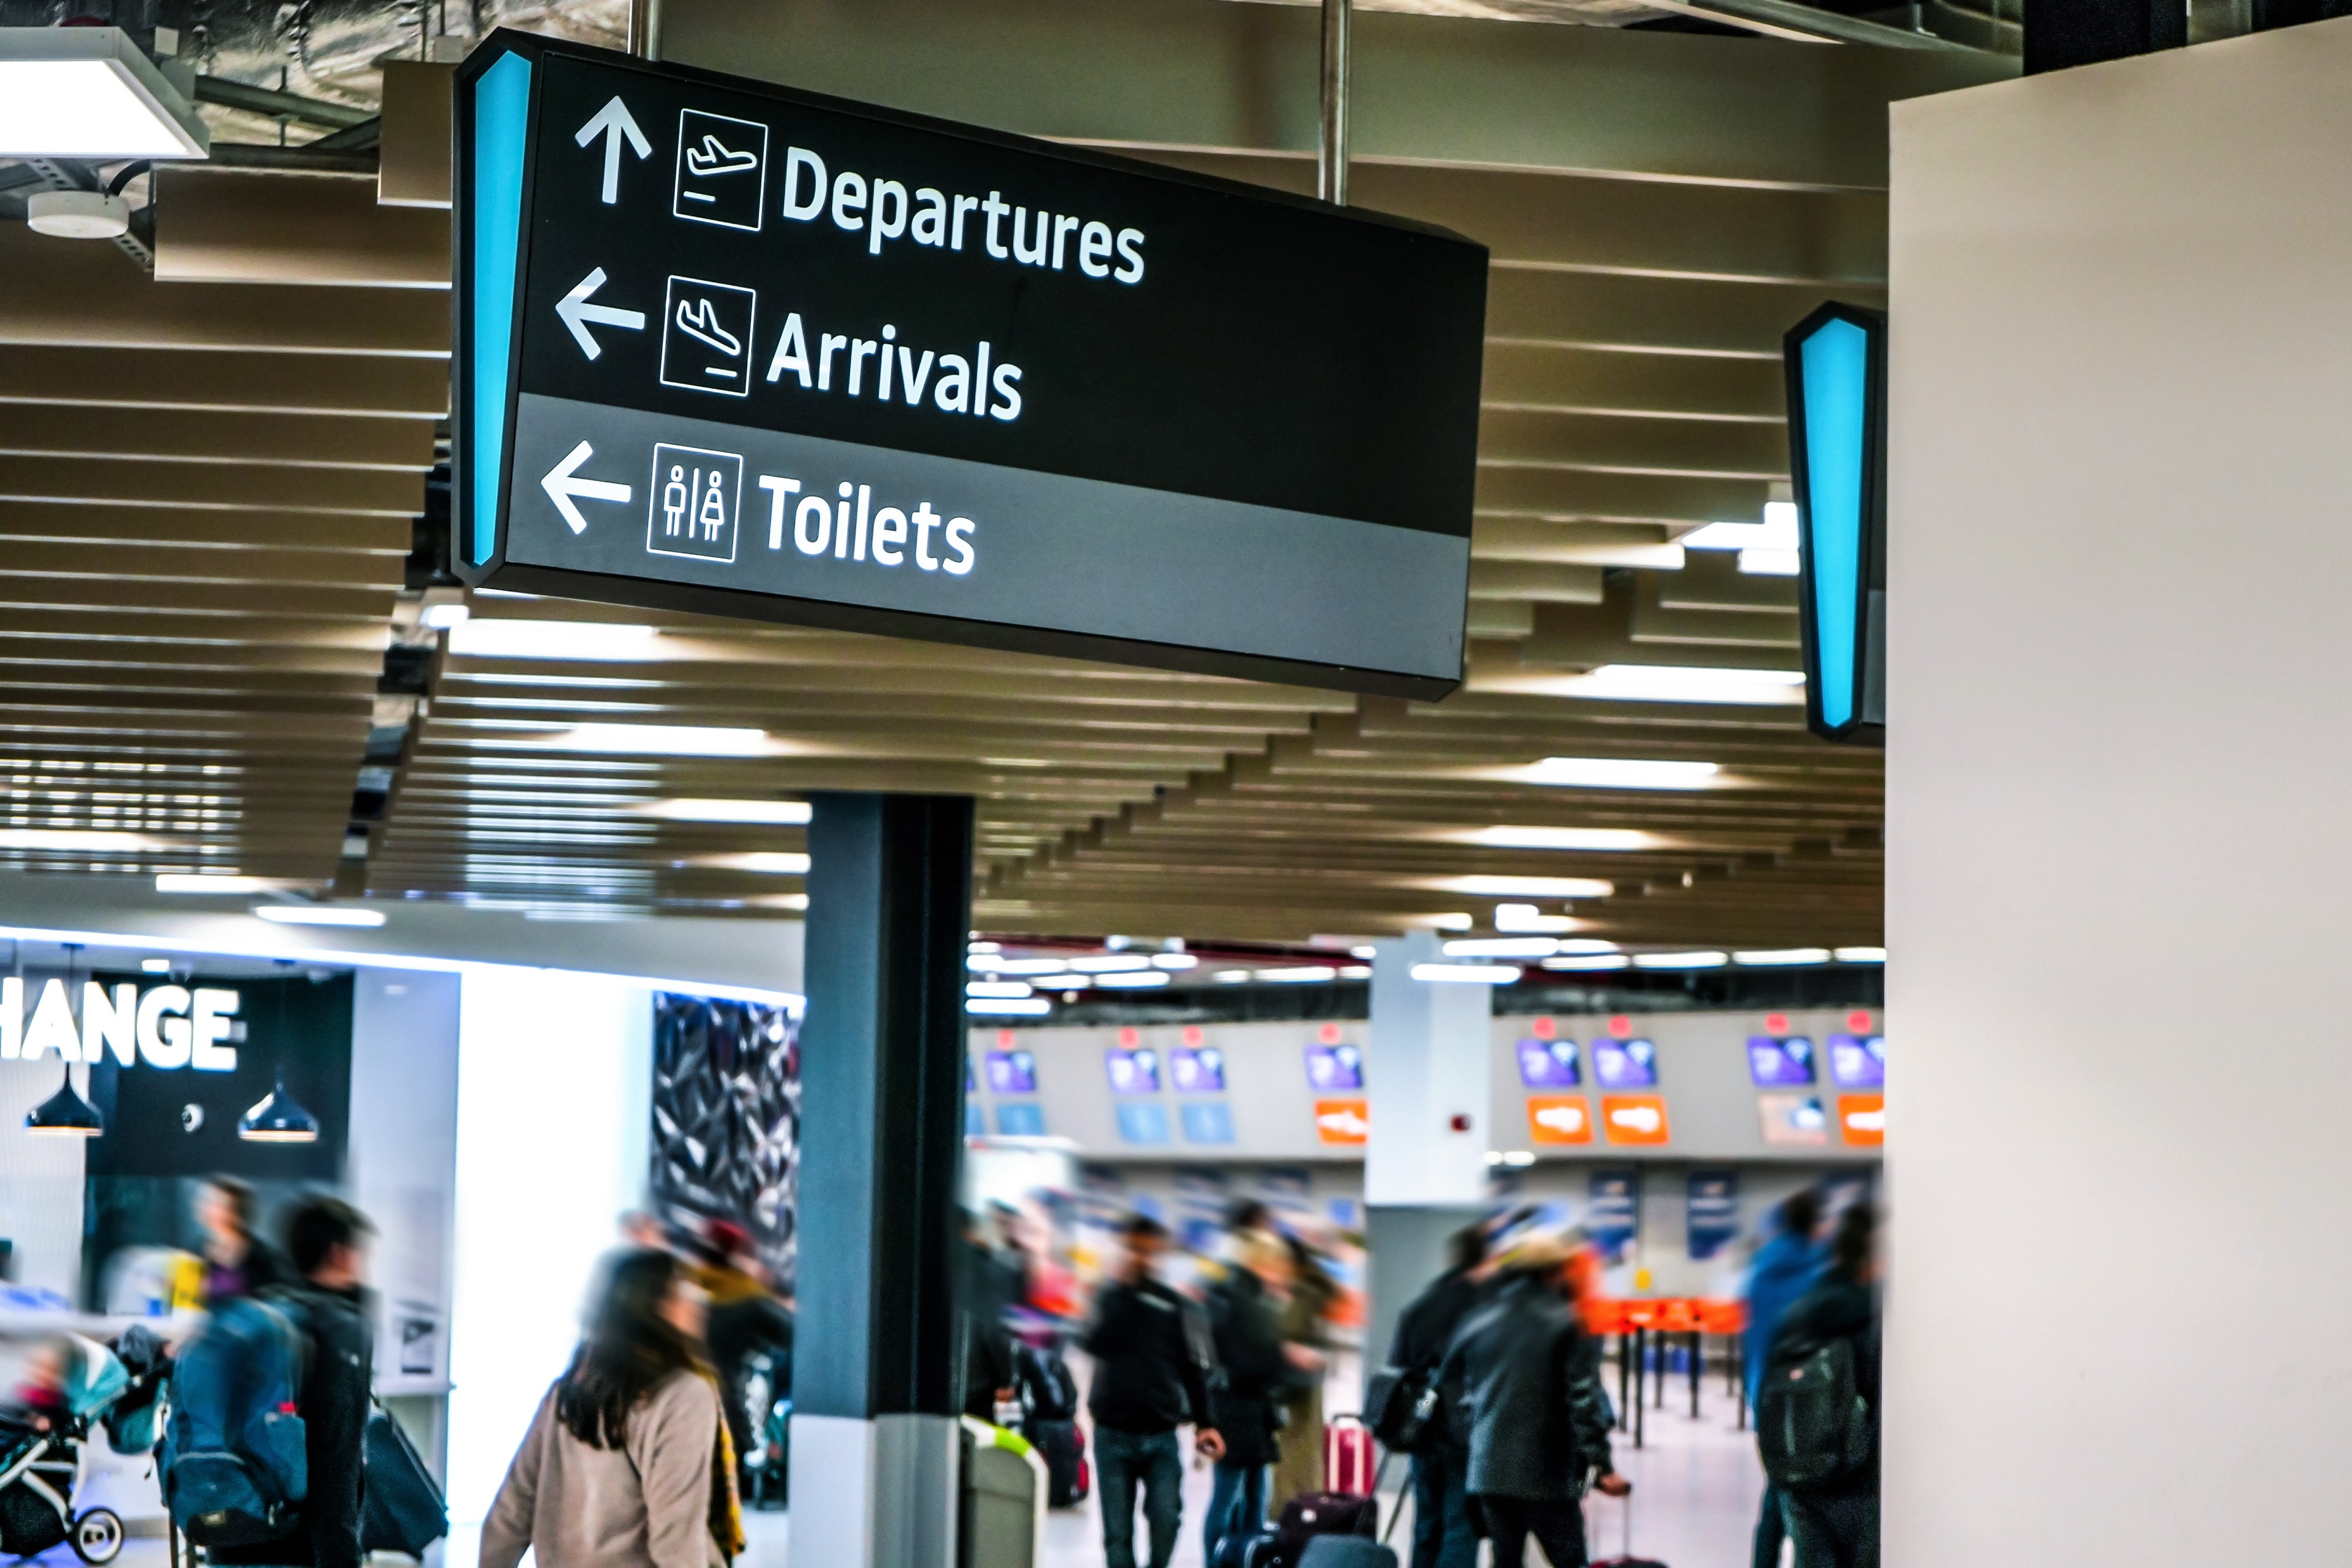 Airport terminal with people walking and signs indicating directions for Departures, Arrivals, and Toilets